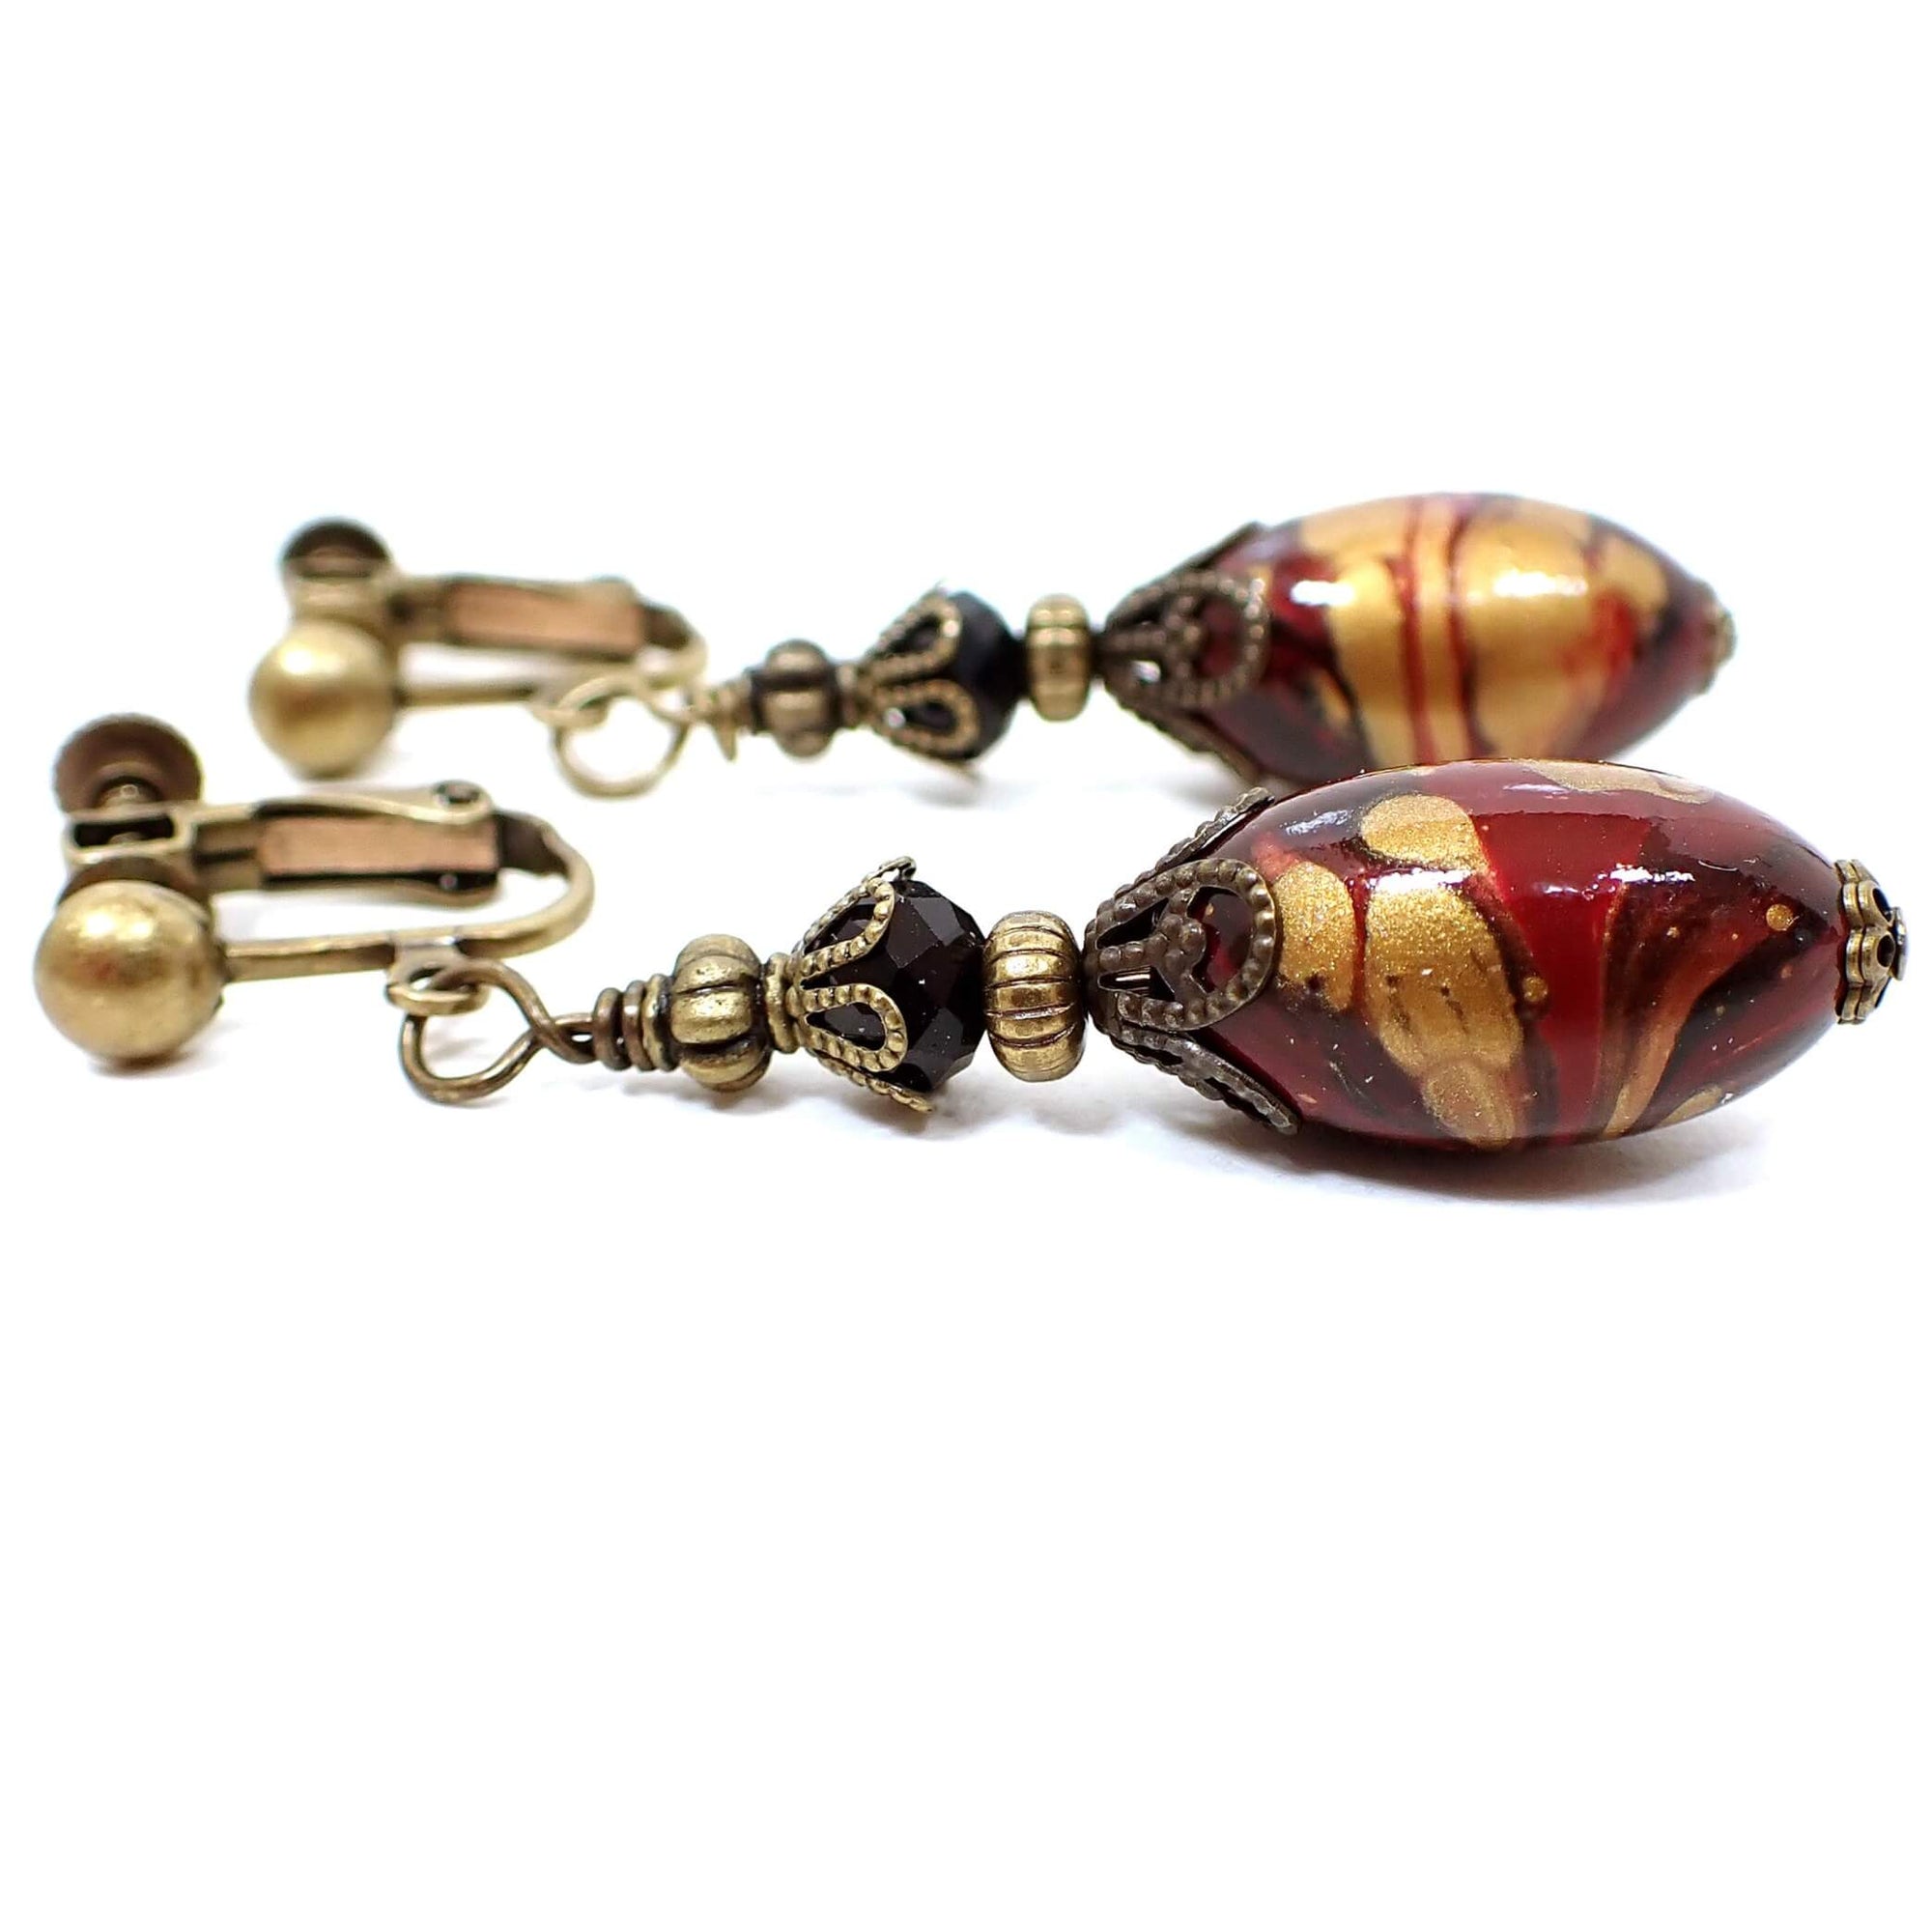 Side view of the handmade marbled lucite oval drop earrings. The metal is antiqued brass in color. There are black faceted glass beads at the top. The bottom beads are oval in shape and have marbled swirls of red, black, and antiqued gold color. Each lucite bead differs from the other for a unique appearance.